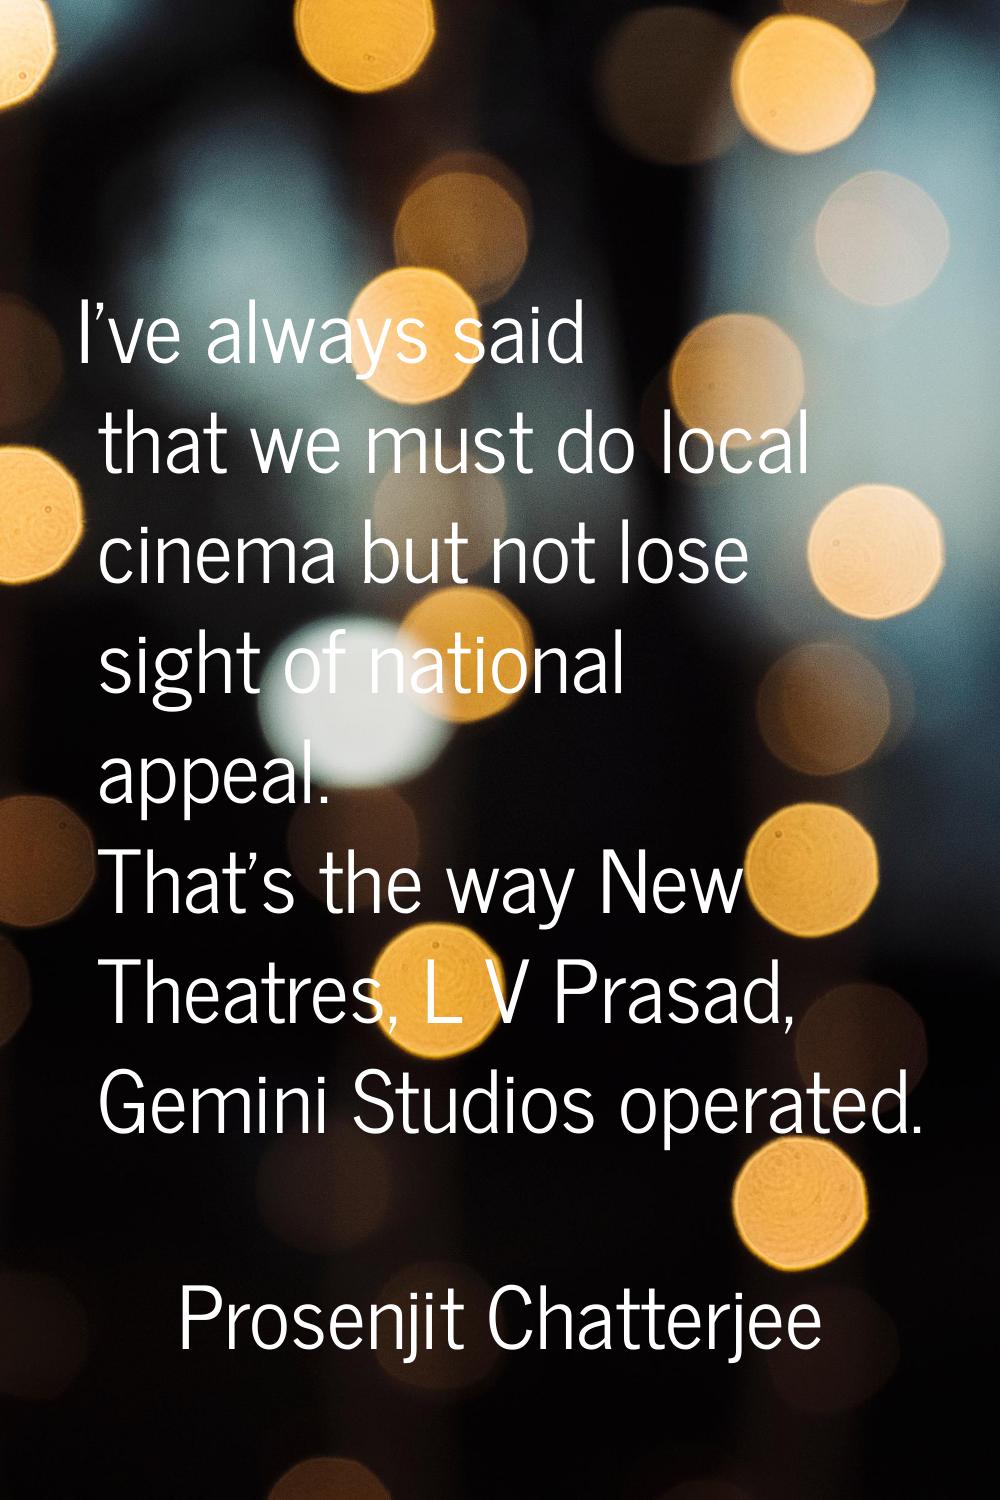 I've always said that we must do local cinema but not lose sight of national appeal. That's the way